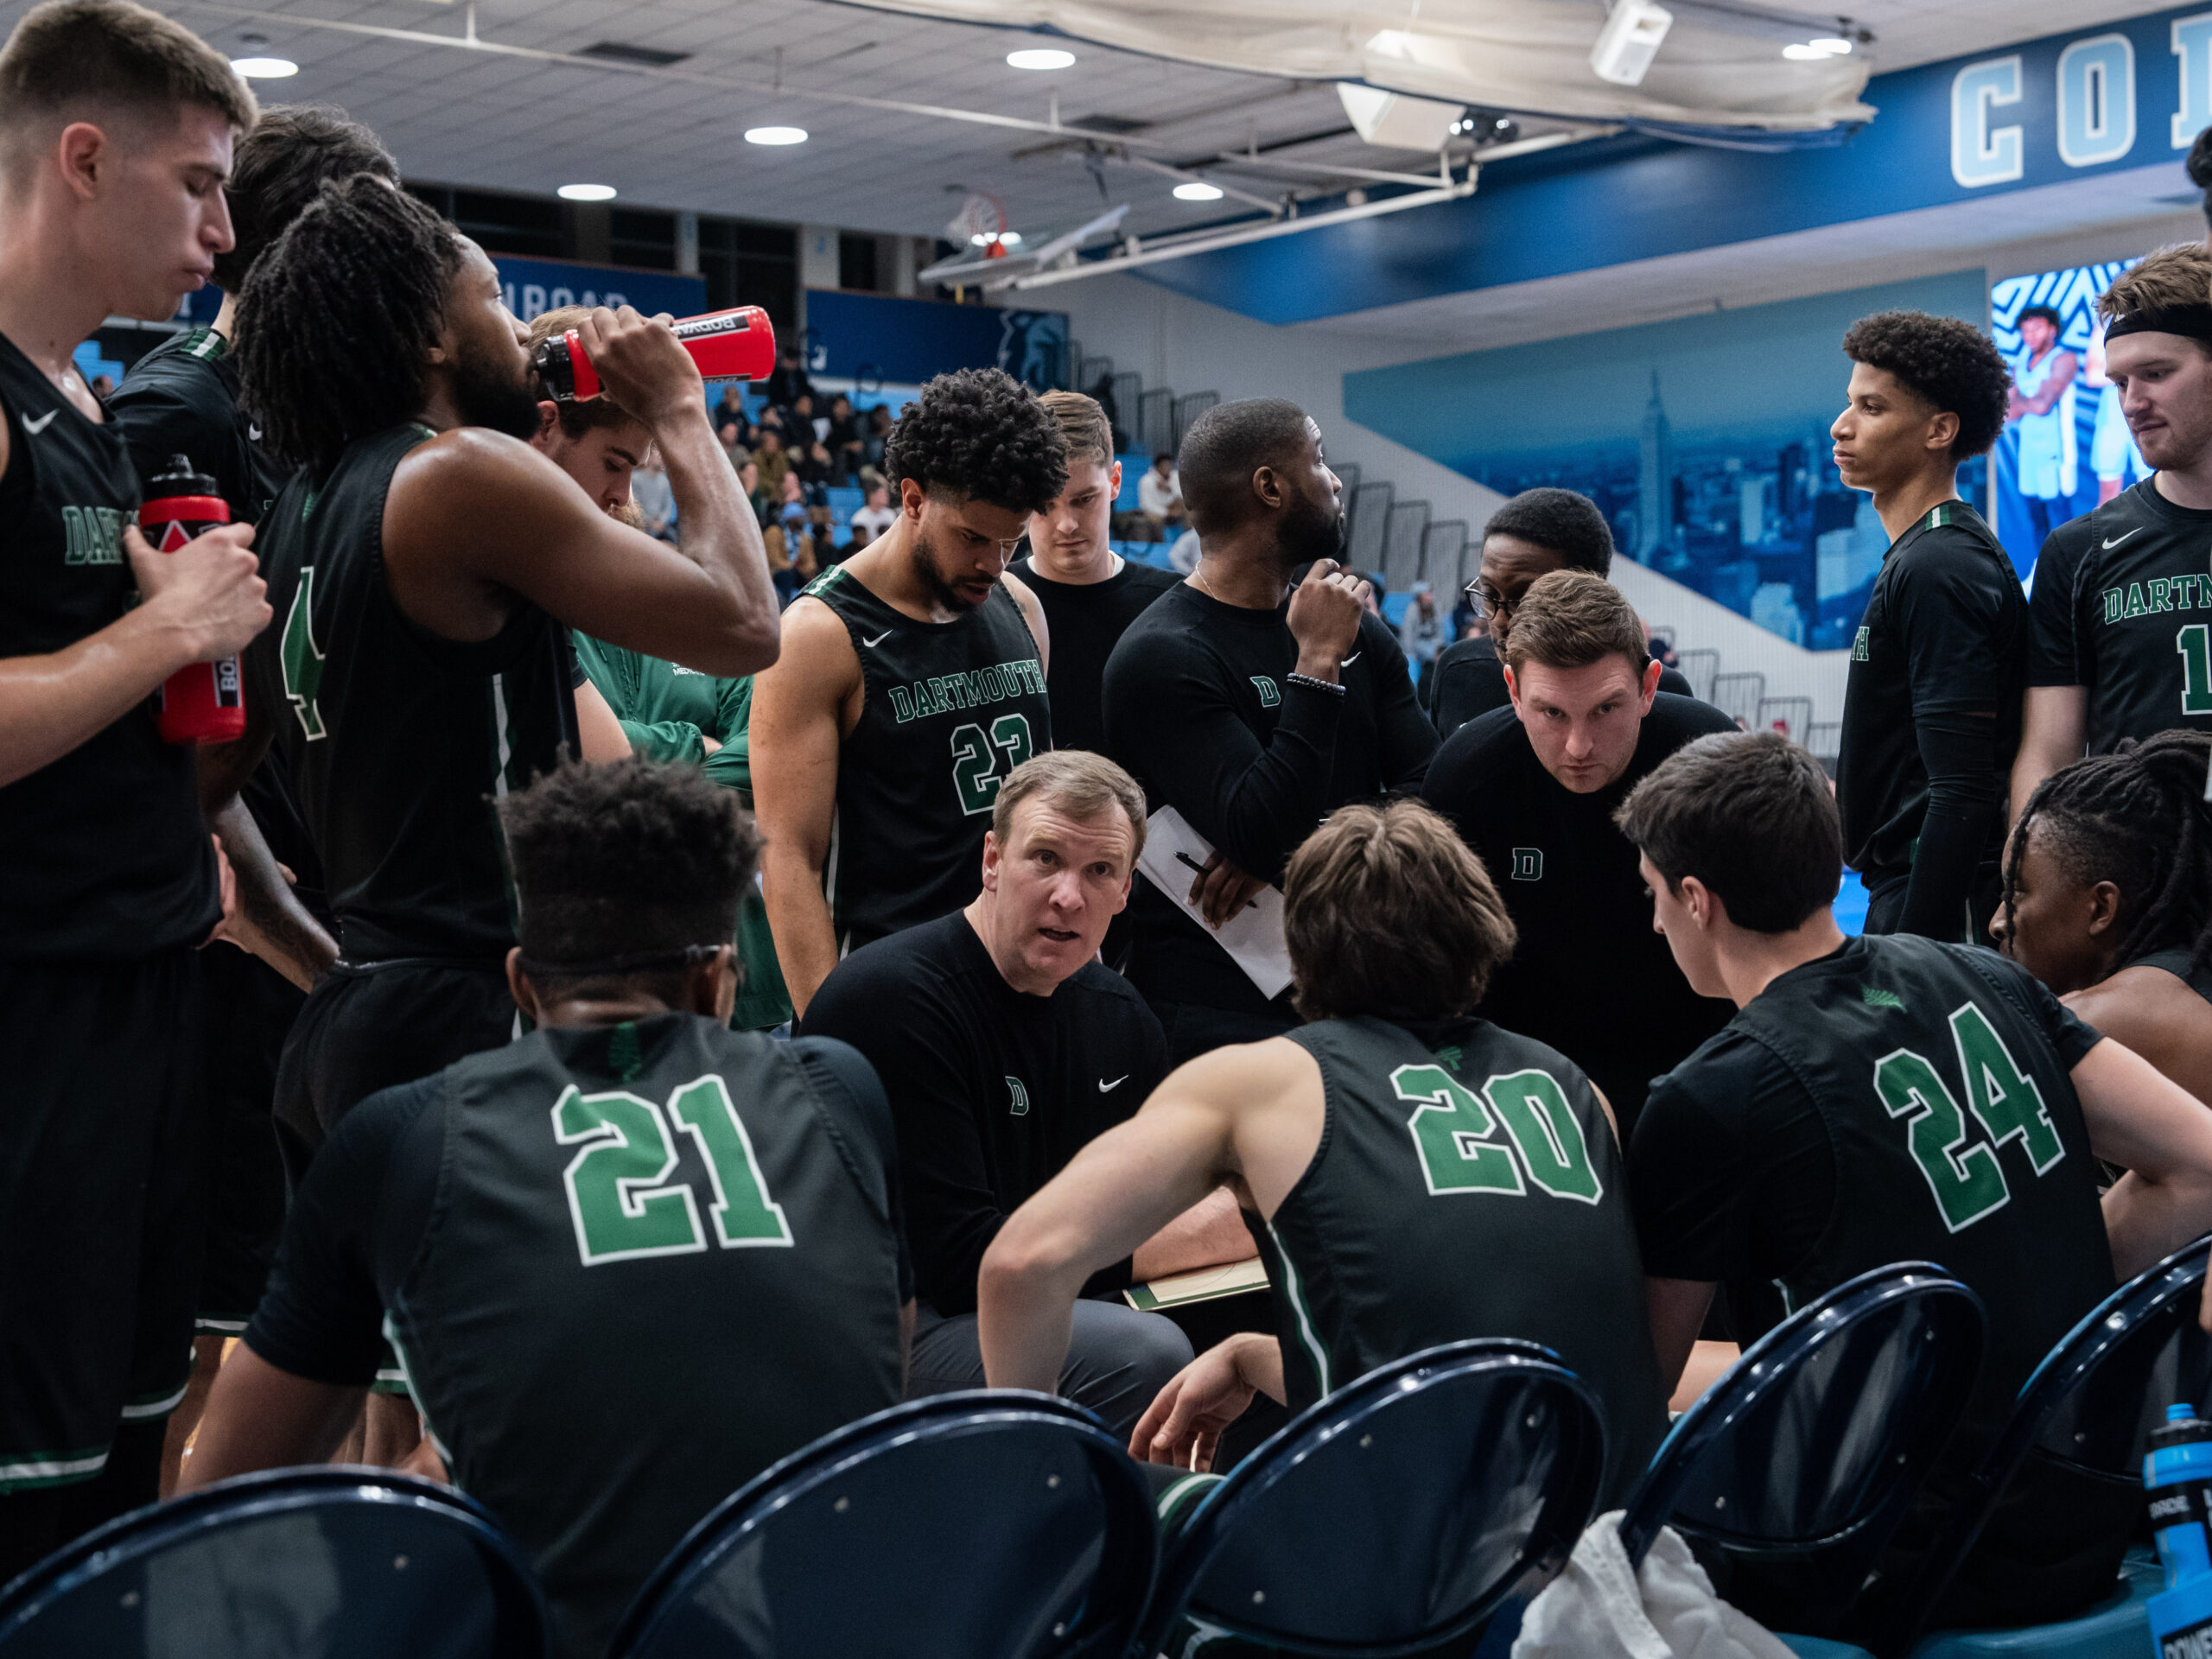 Dartmouth men’s basketball team votes to unionize, shaking up college sports